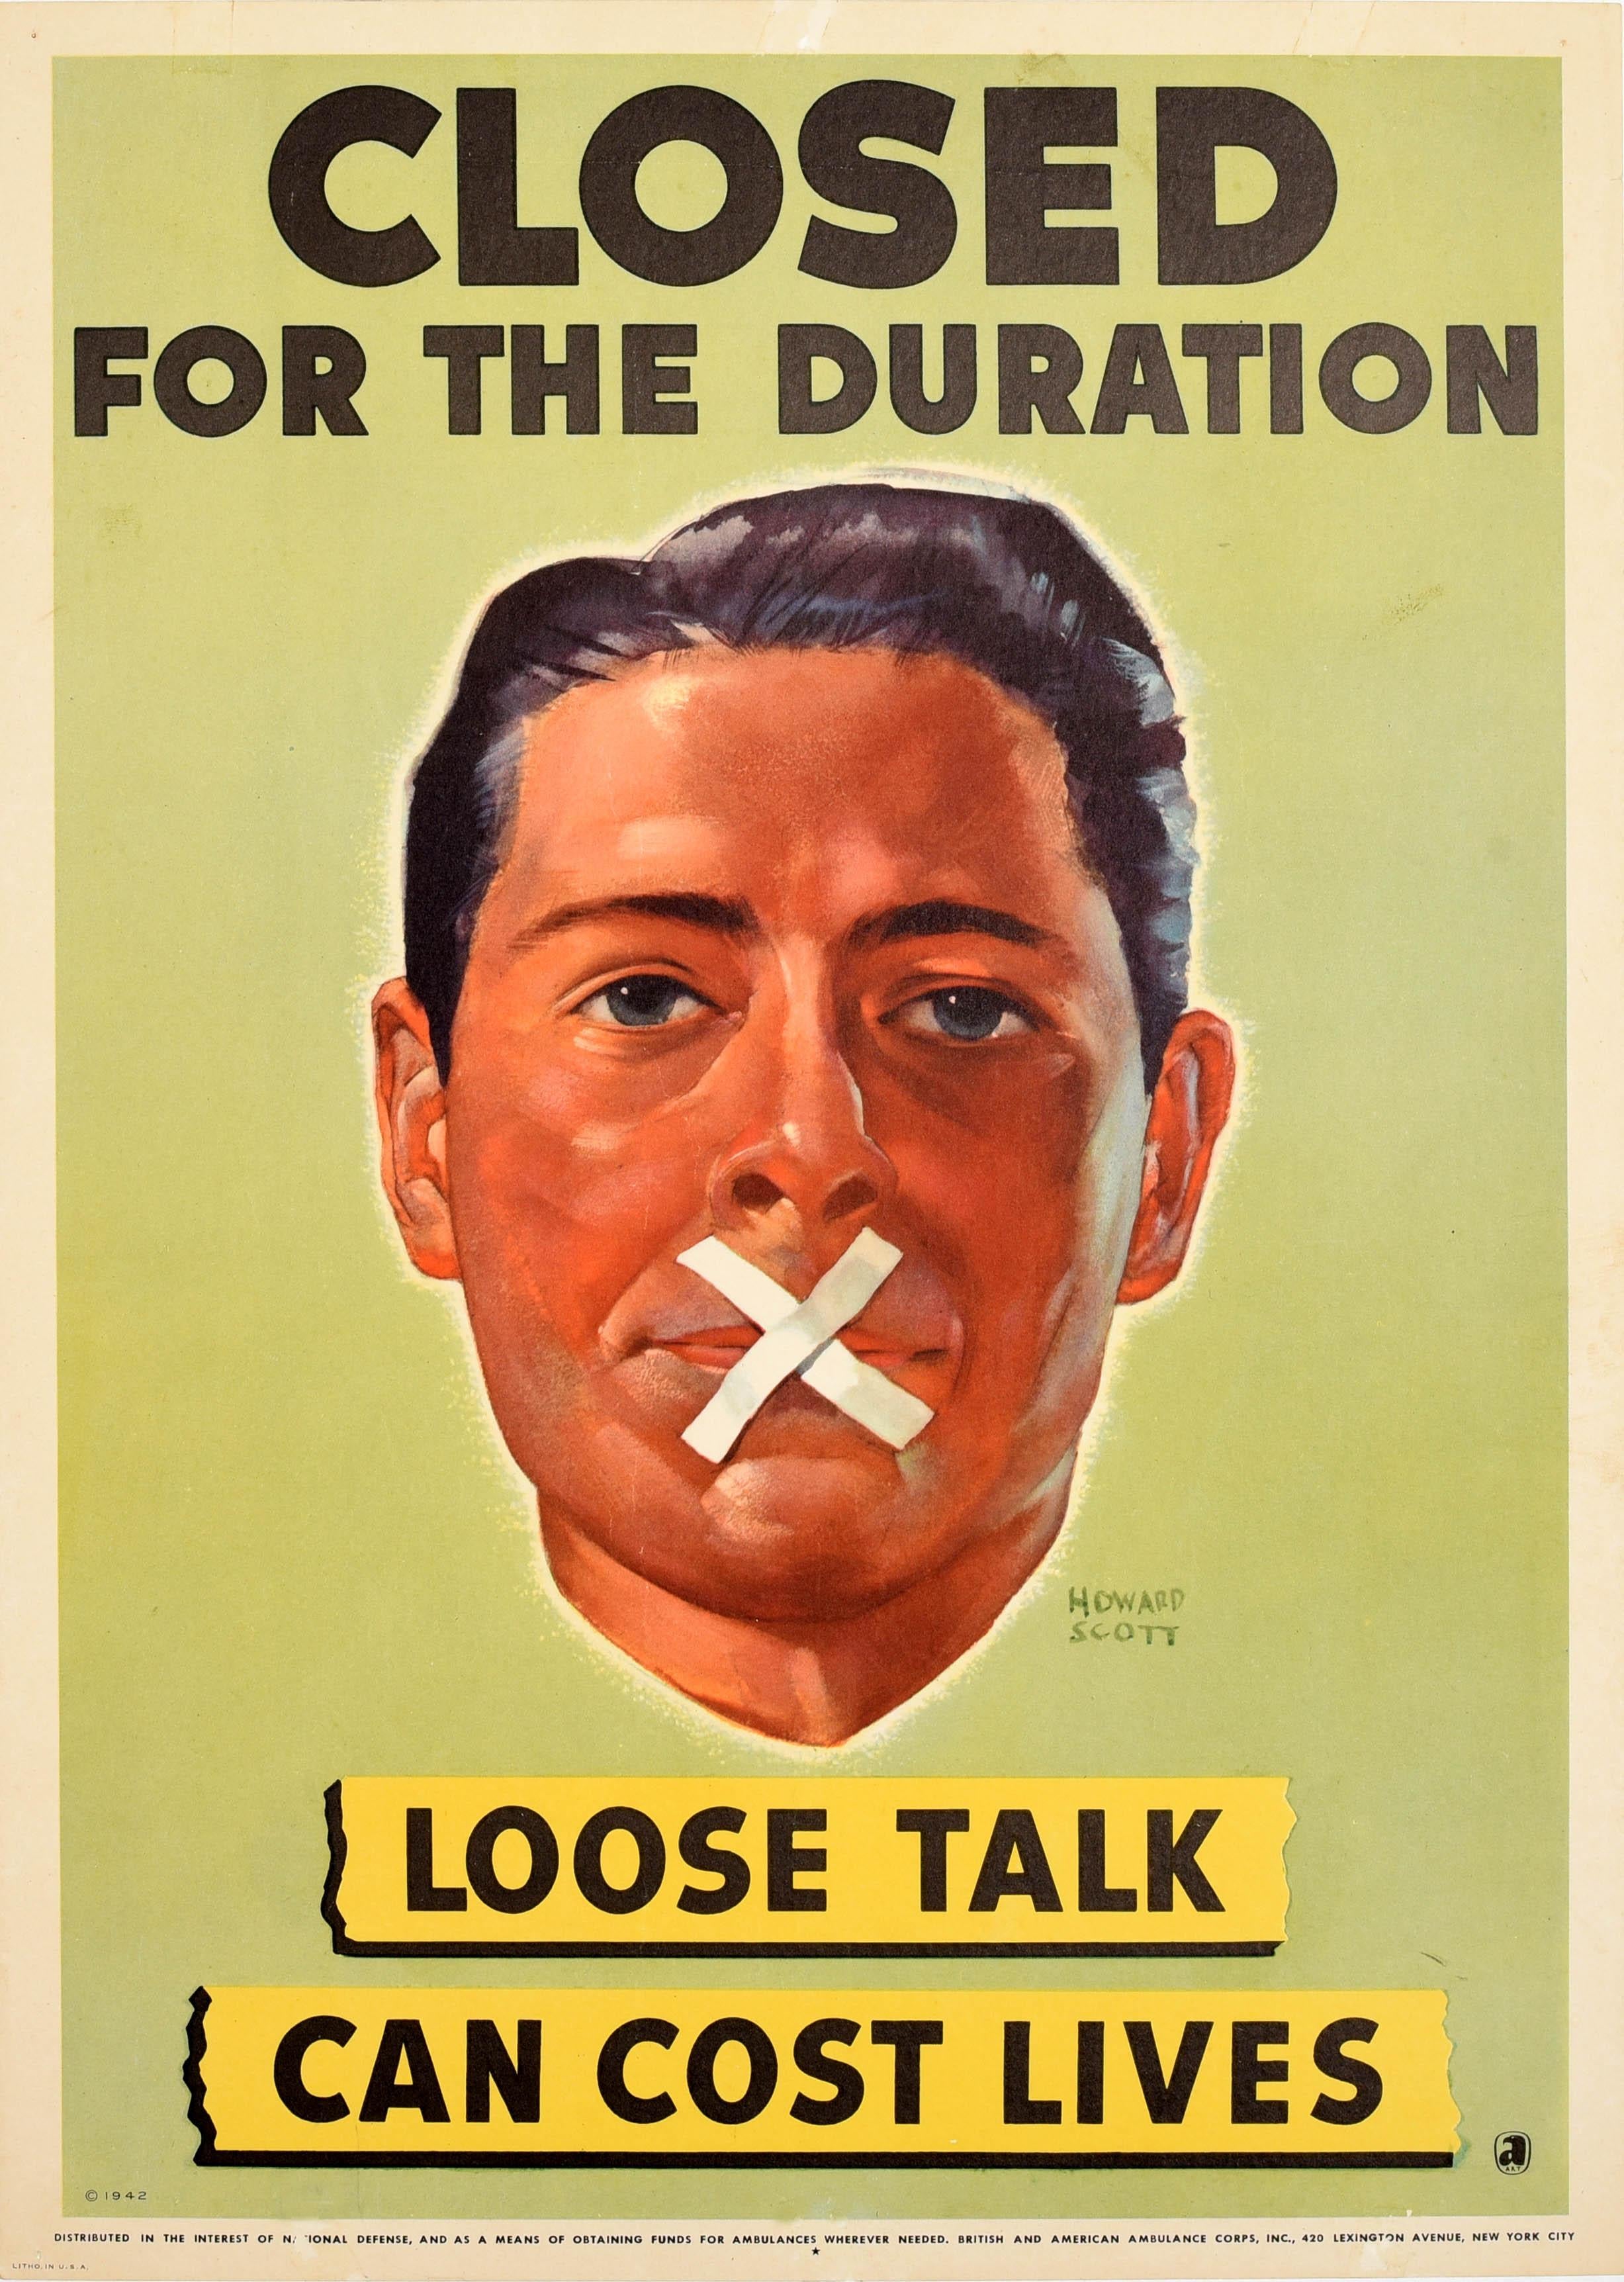 Original vintage World War Two propaganda poster - Loose Talk Can Cost Lives Closed for the Duration - featuring great artwork by Howard Scott (1902-1983) depicting a man with tape stuck over his mouth in a X cross shape to show no talking with the